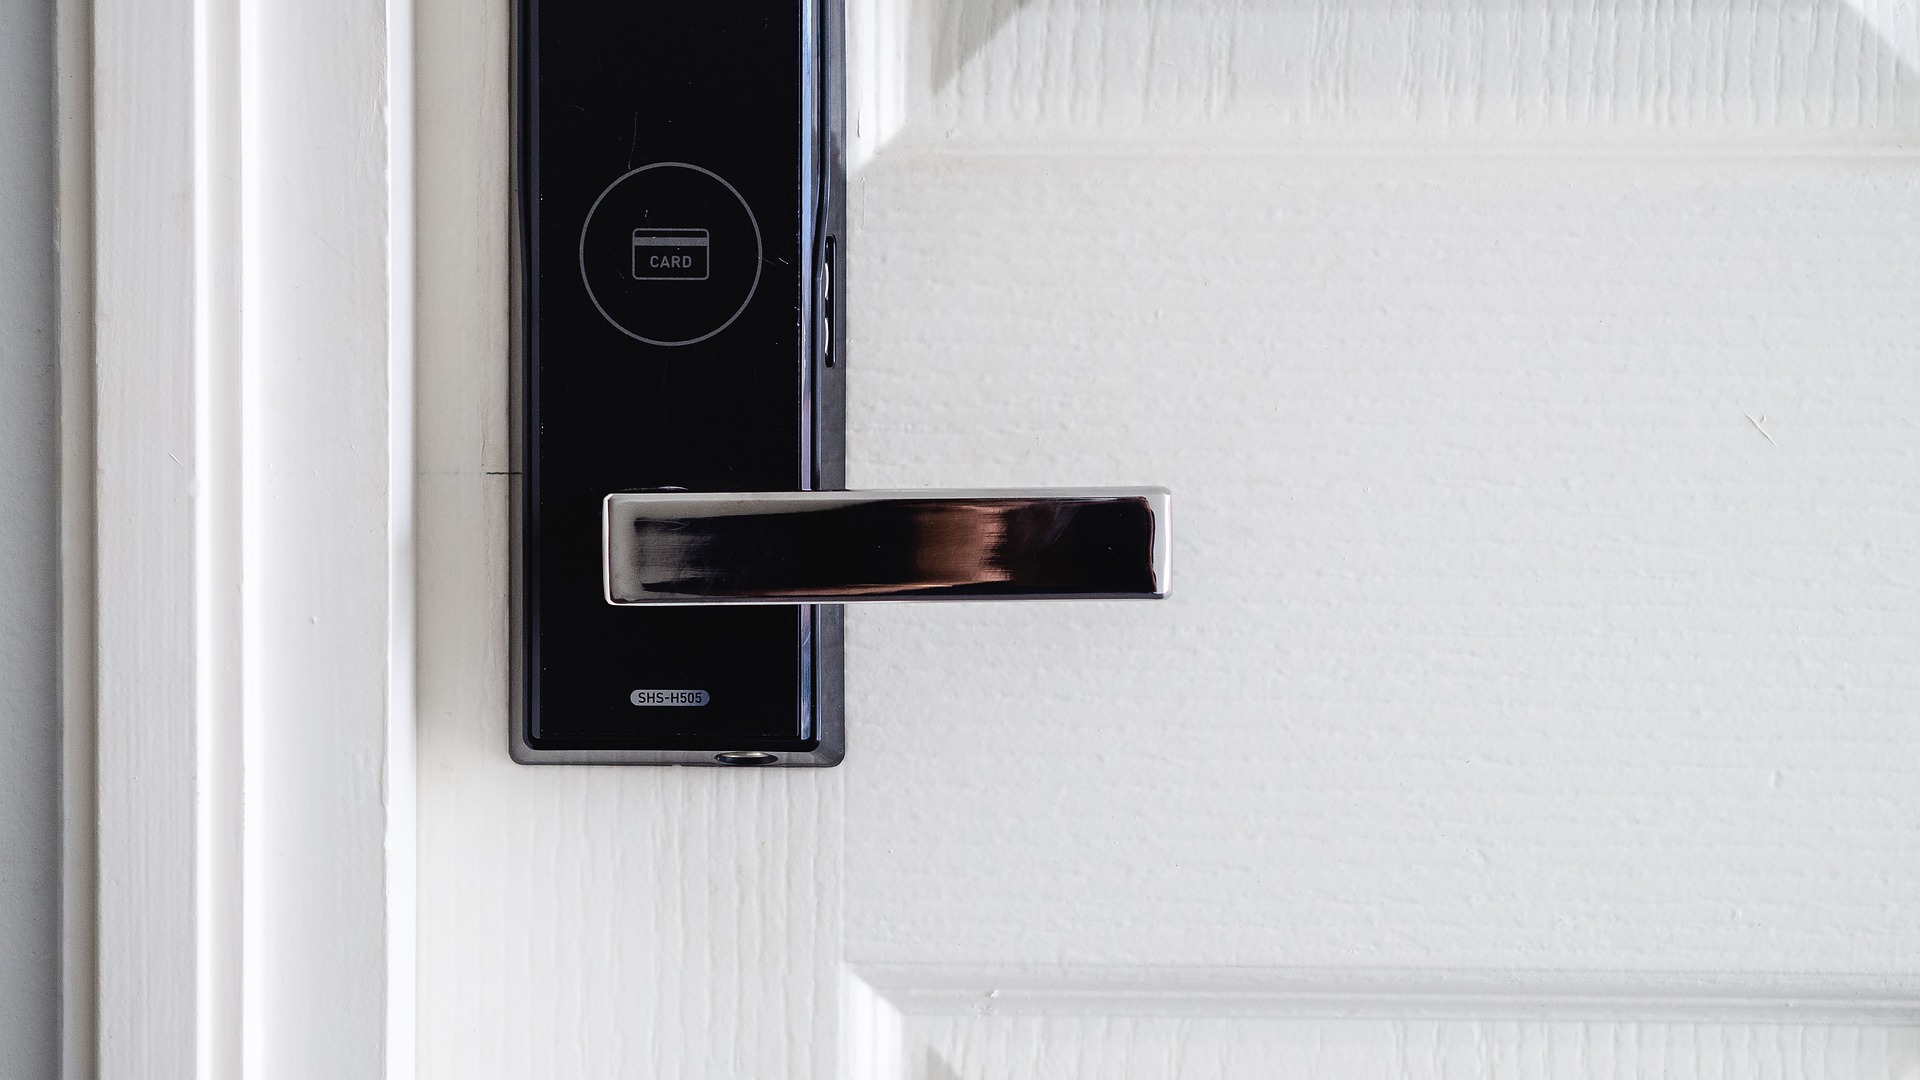 Is a Smart Lock safer than a Traditional Lock?